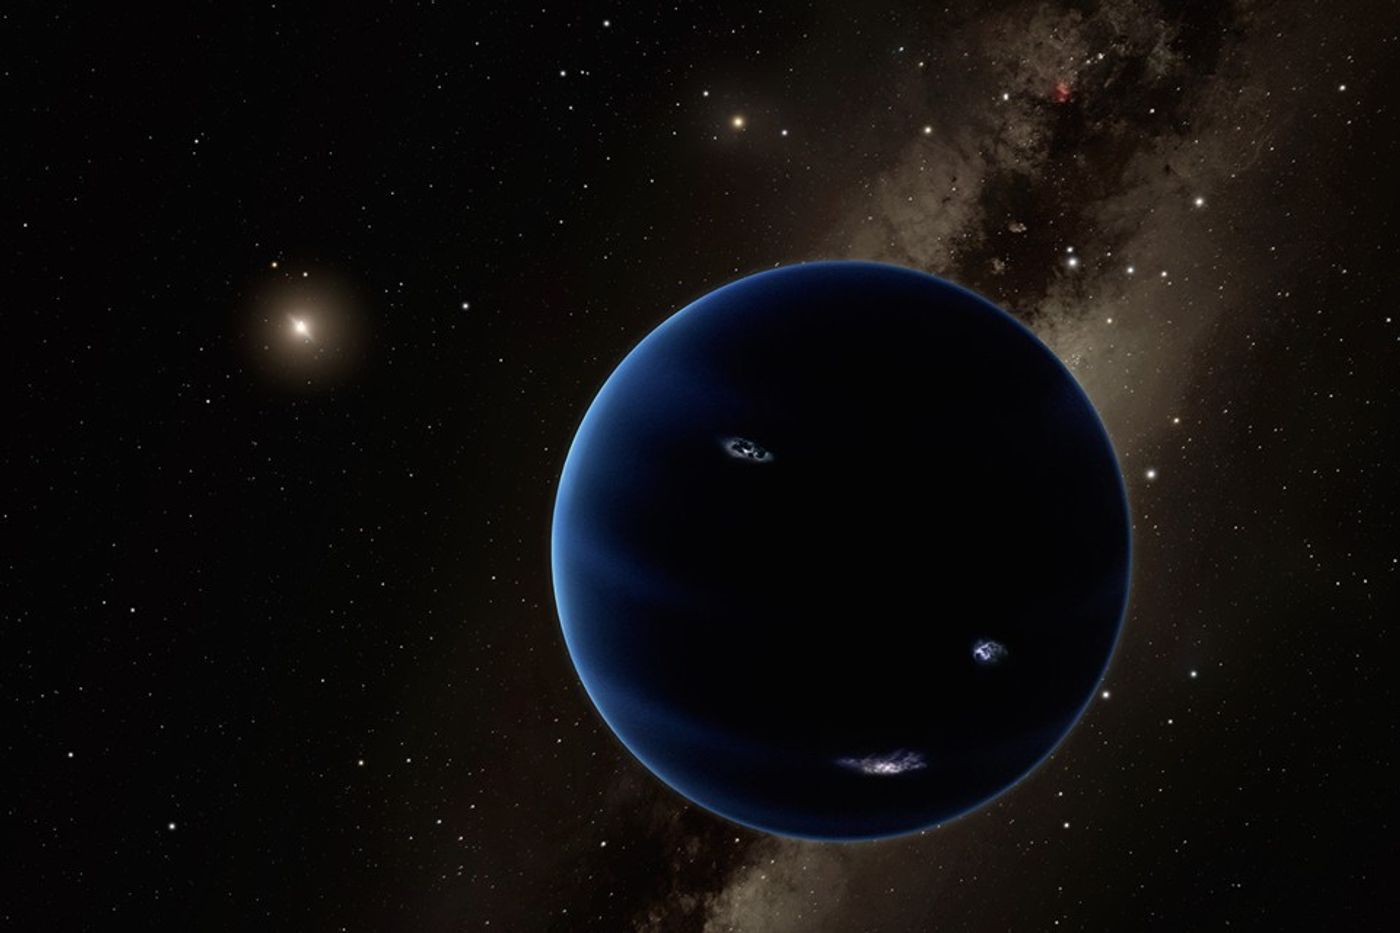 Does Planet 9 exist? Researchers are still trying to figure that out...